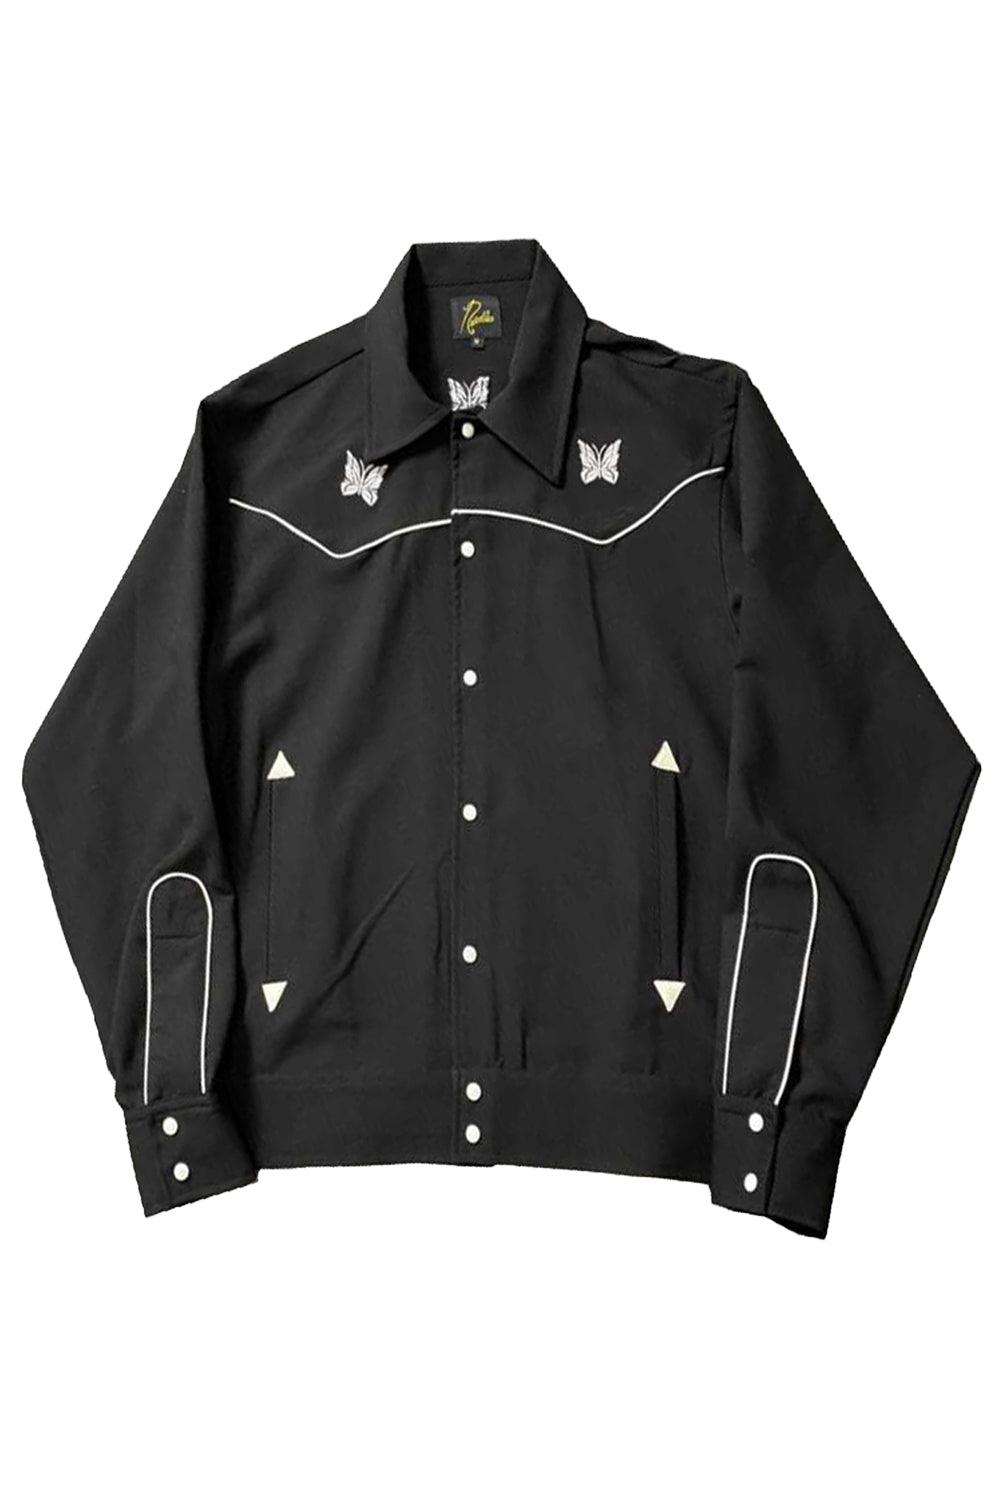 Black Butterfly Embroidery Shirt - Aesthetic Clothes Shop